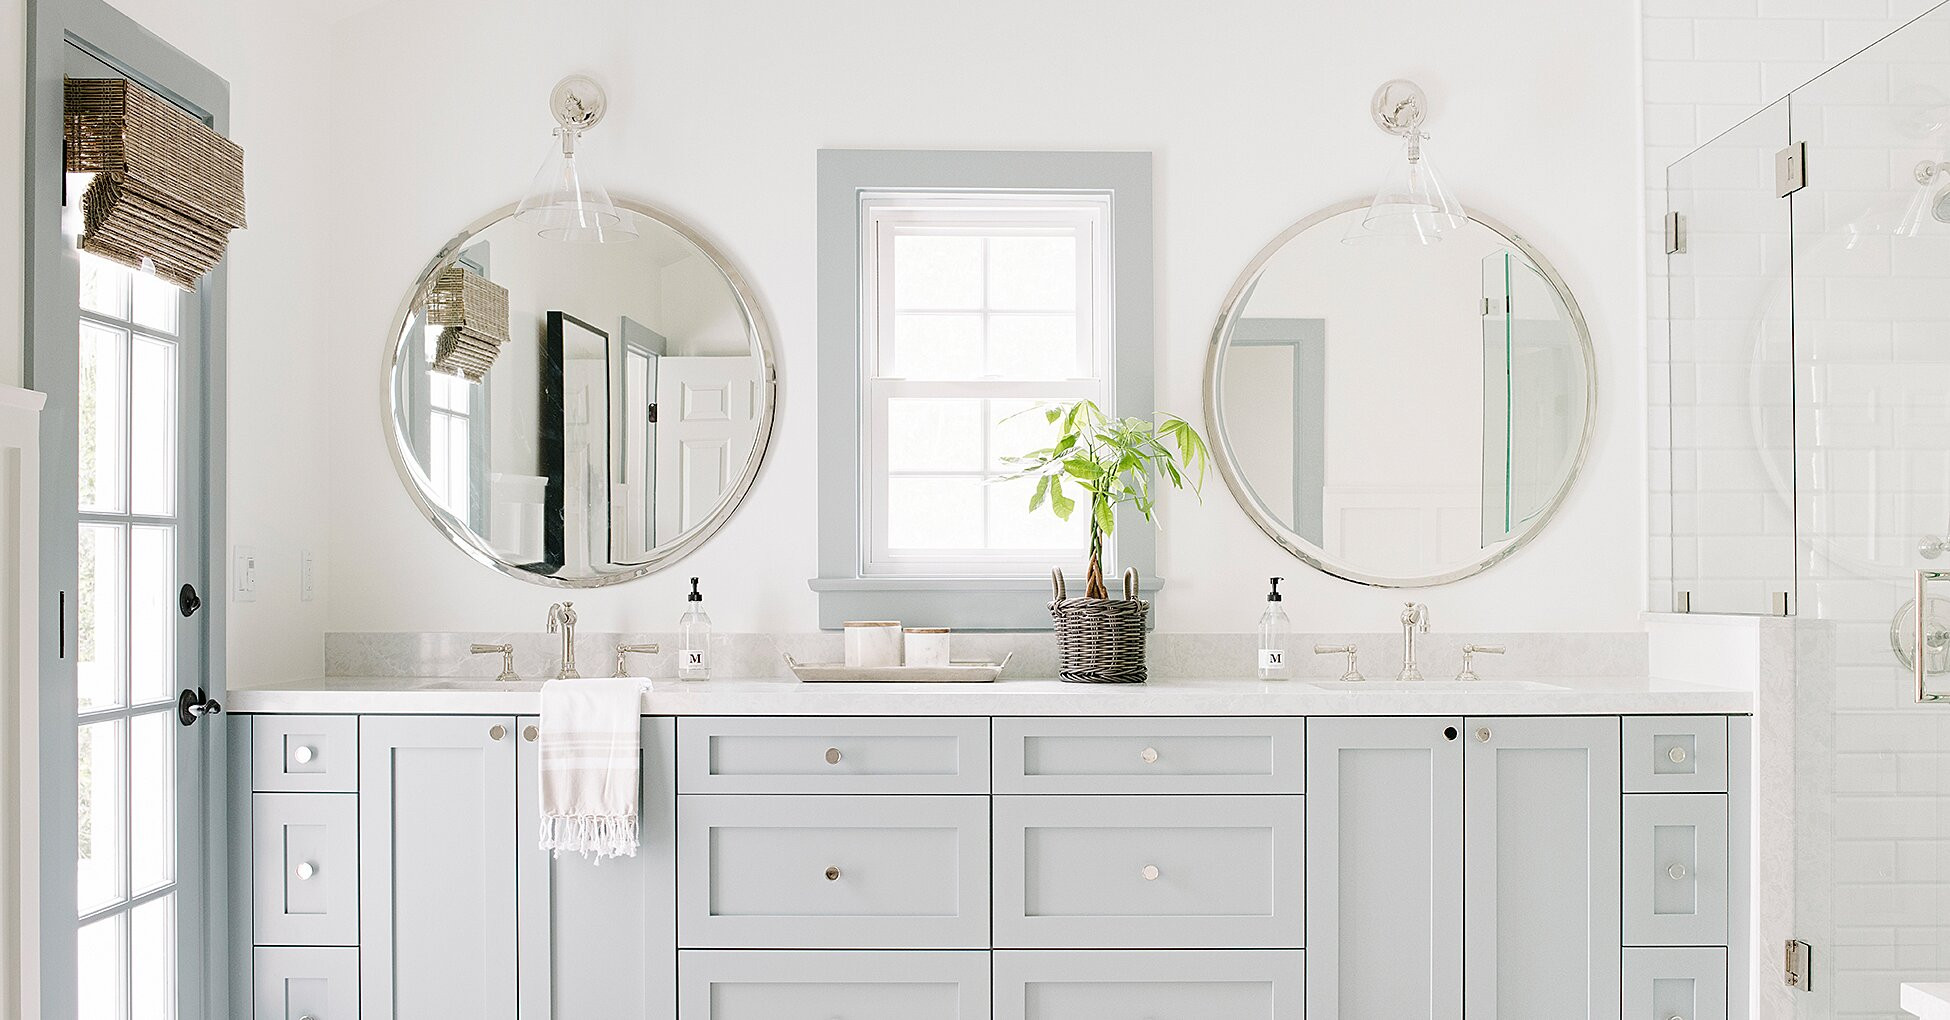 Popular Bathroom Paint Colors
 These Are the Most Popular Bathroom Paint Colors for 2020